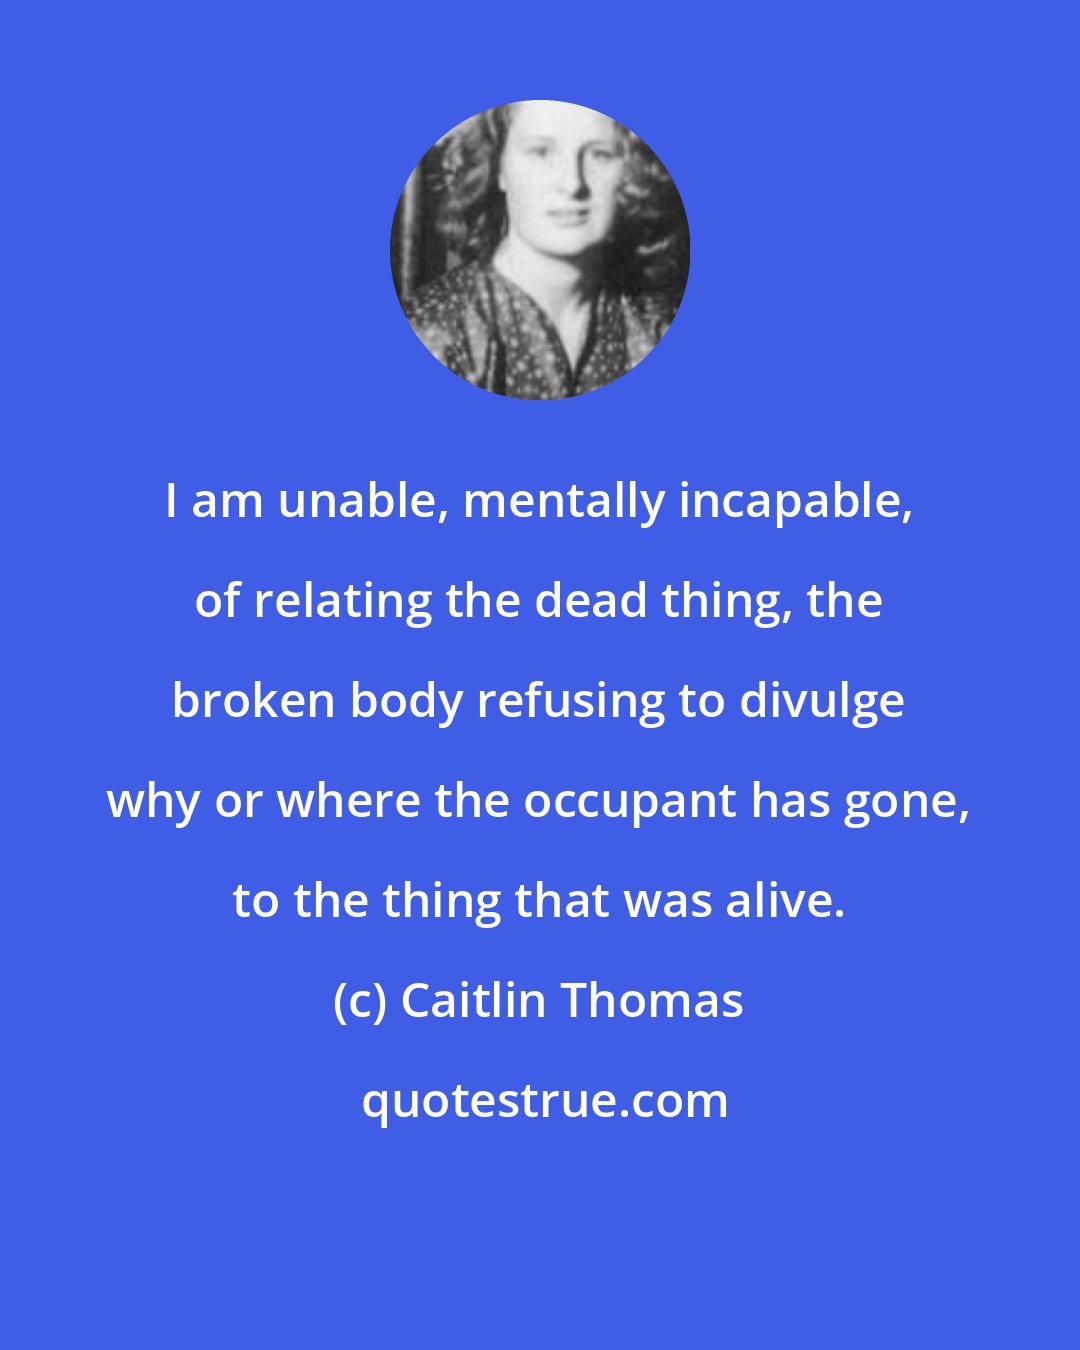 Caitlin Thomas: I am unable, mentally incapable, of relating the dead thing, the broken body refusing to divulge why or where the occupant has gone, to the thing that was alive.